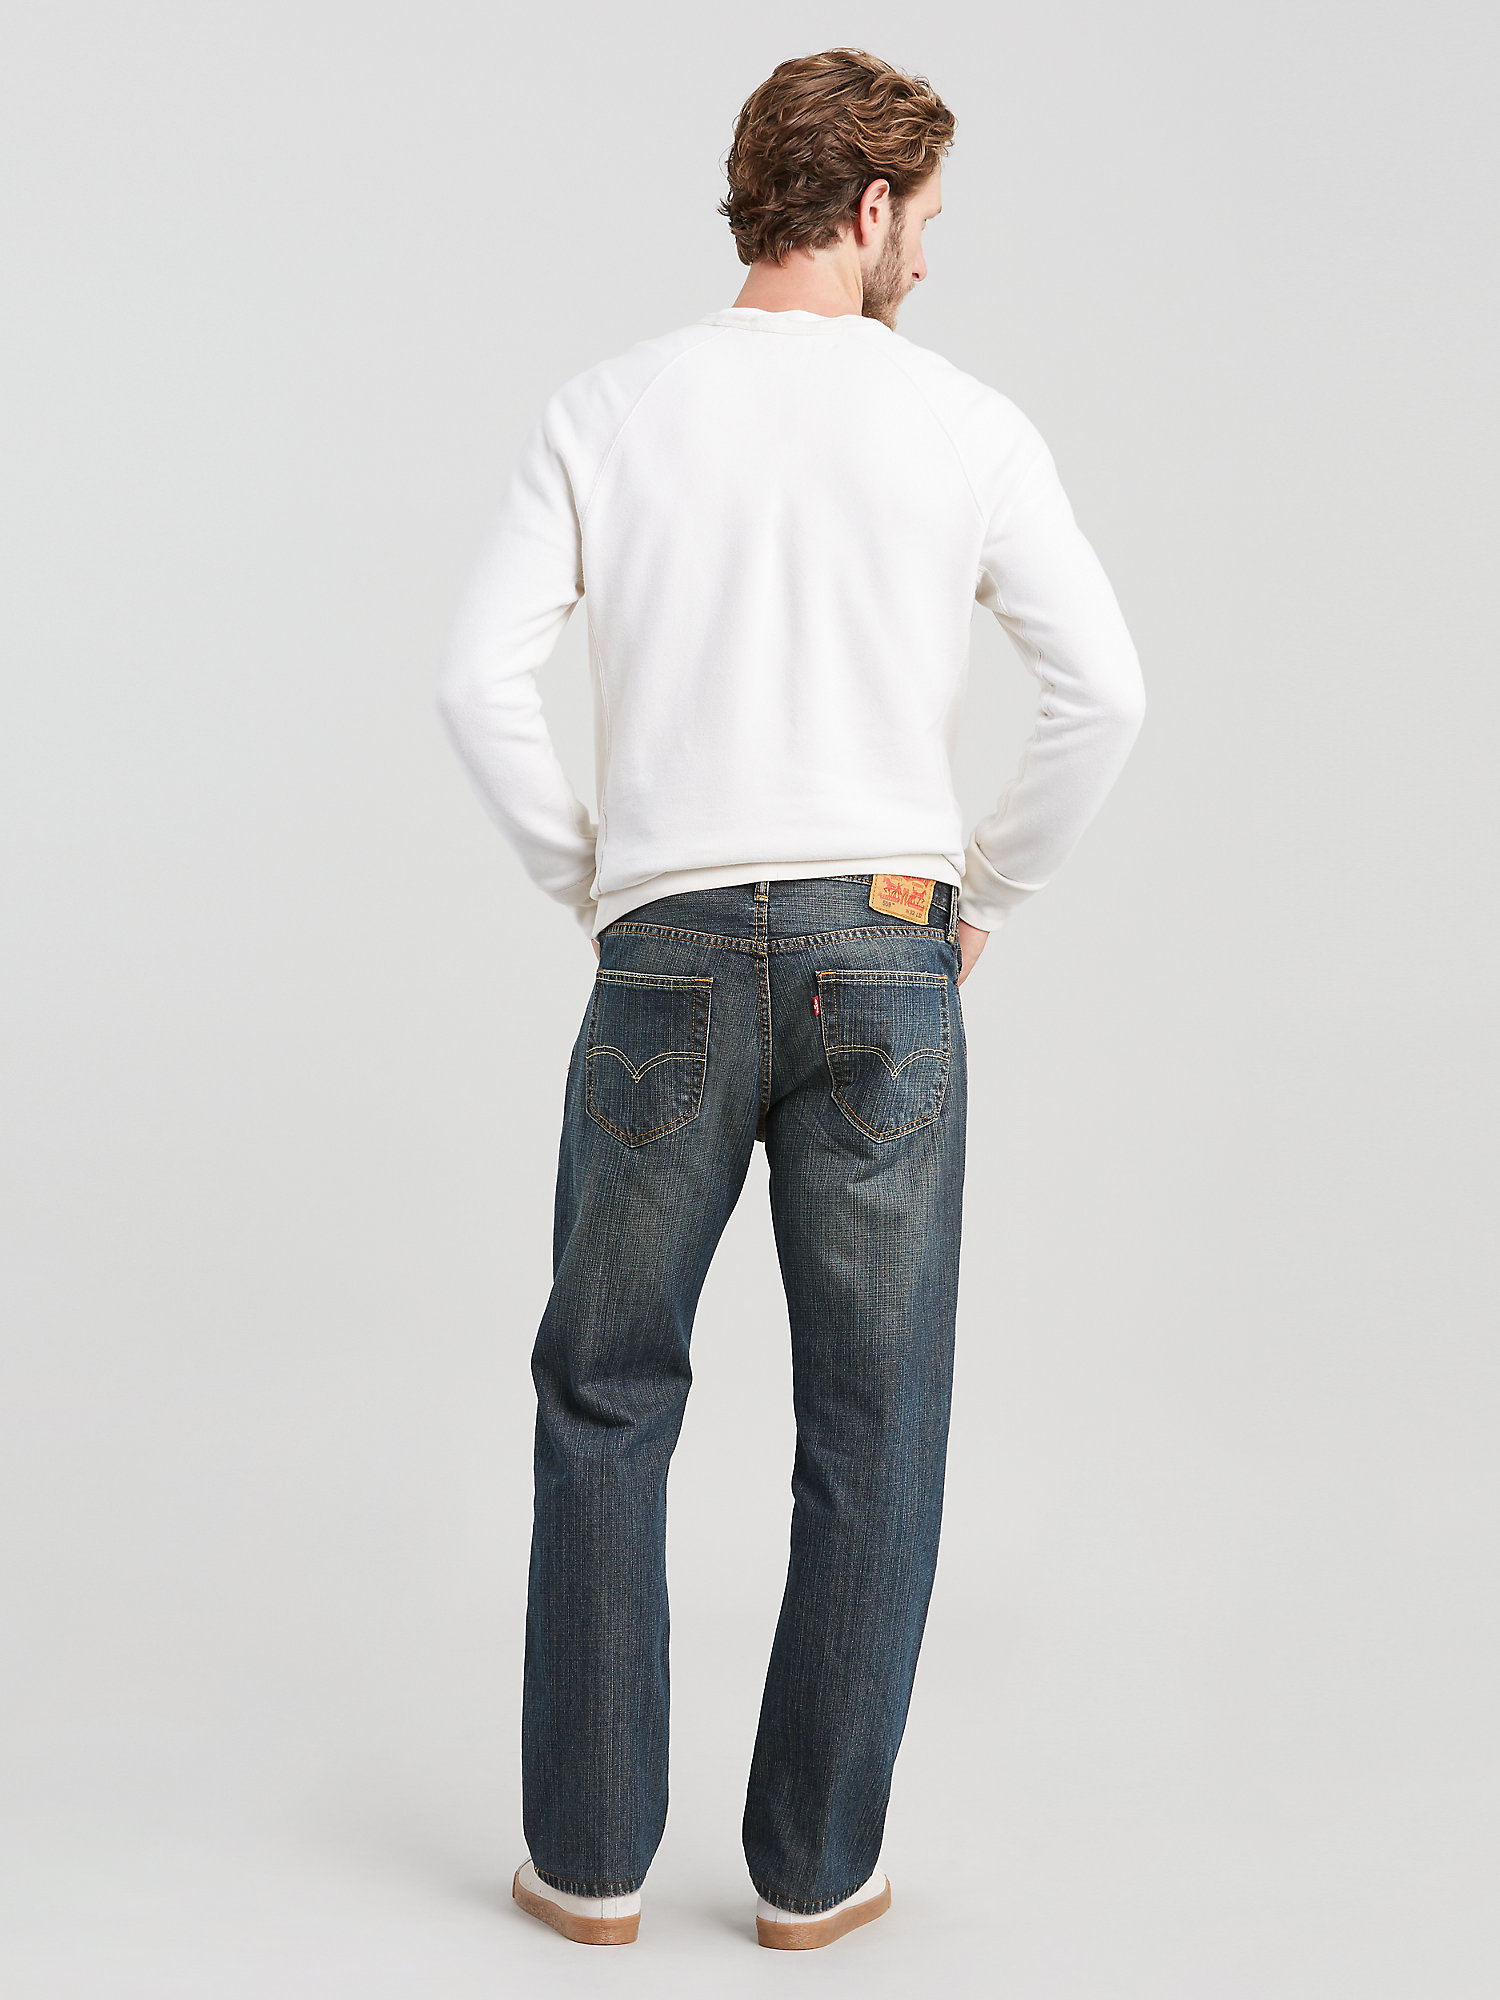 Levi's Men's Big & Tall 559 Relaxed Straight Jeans - image 3 of 6